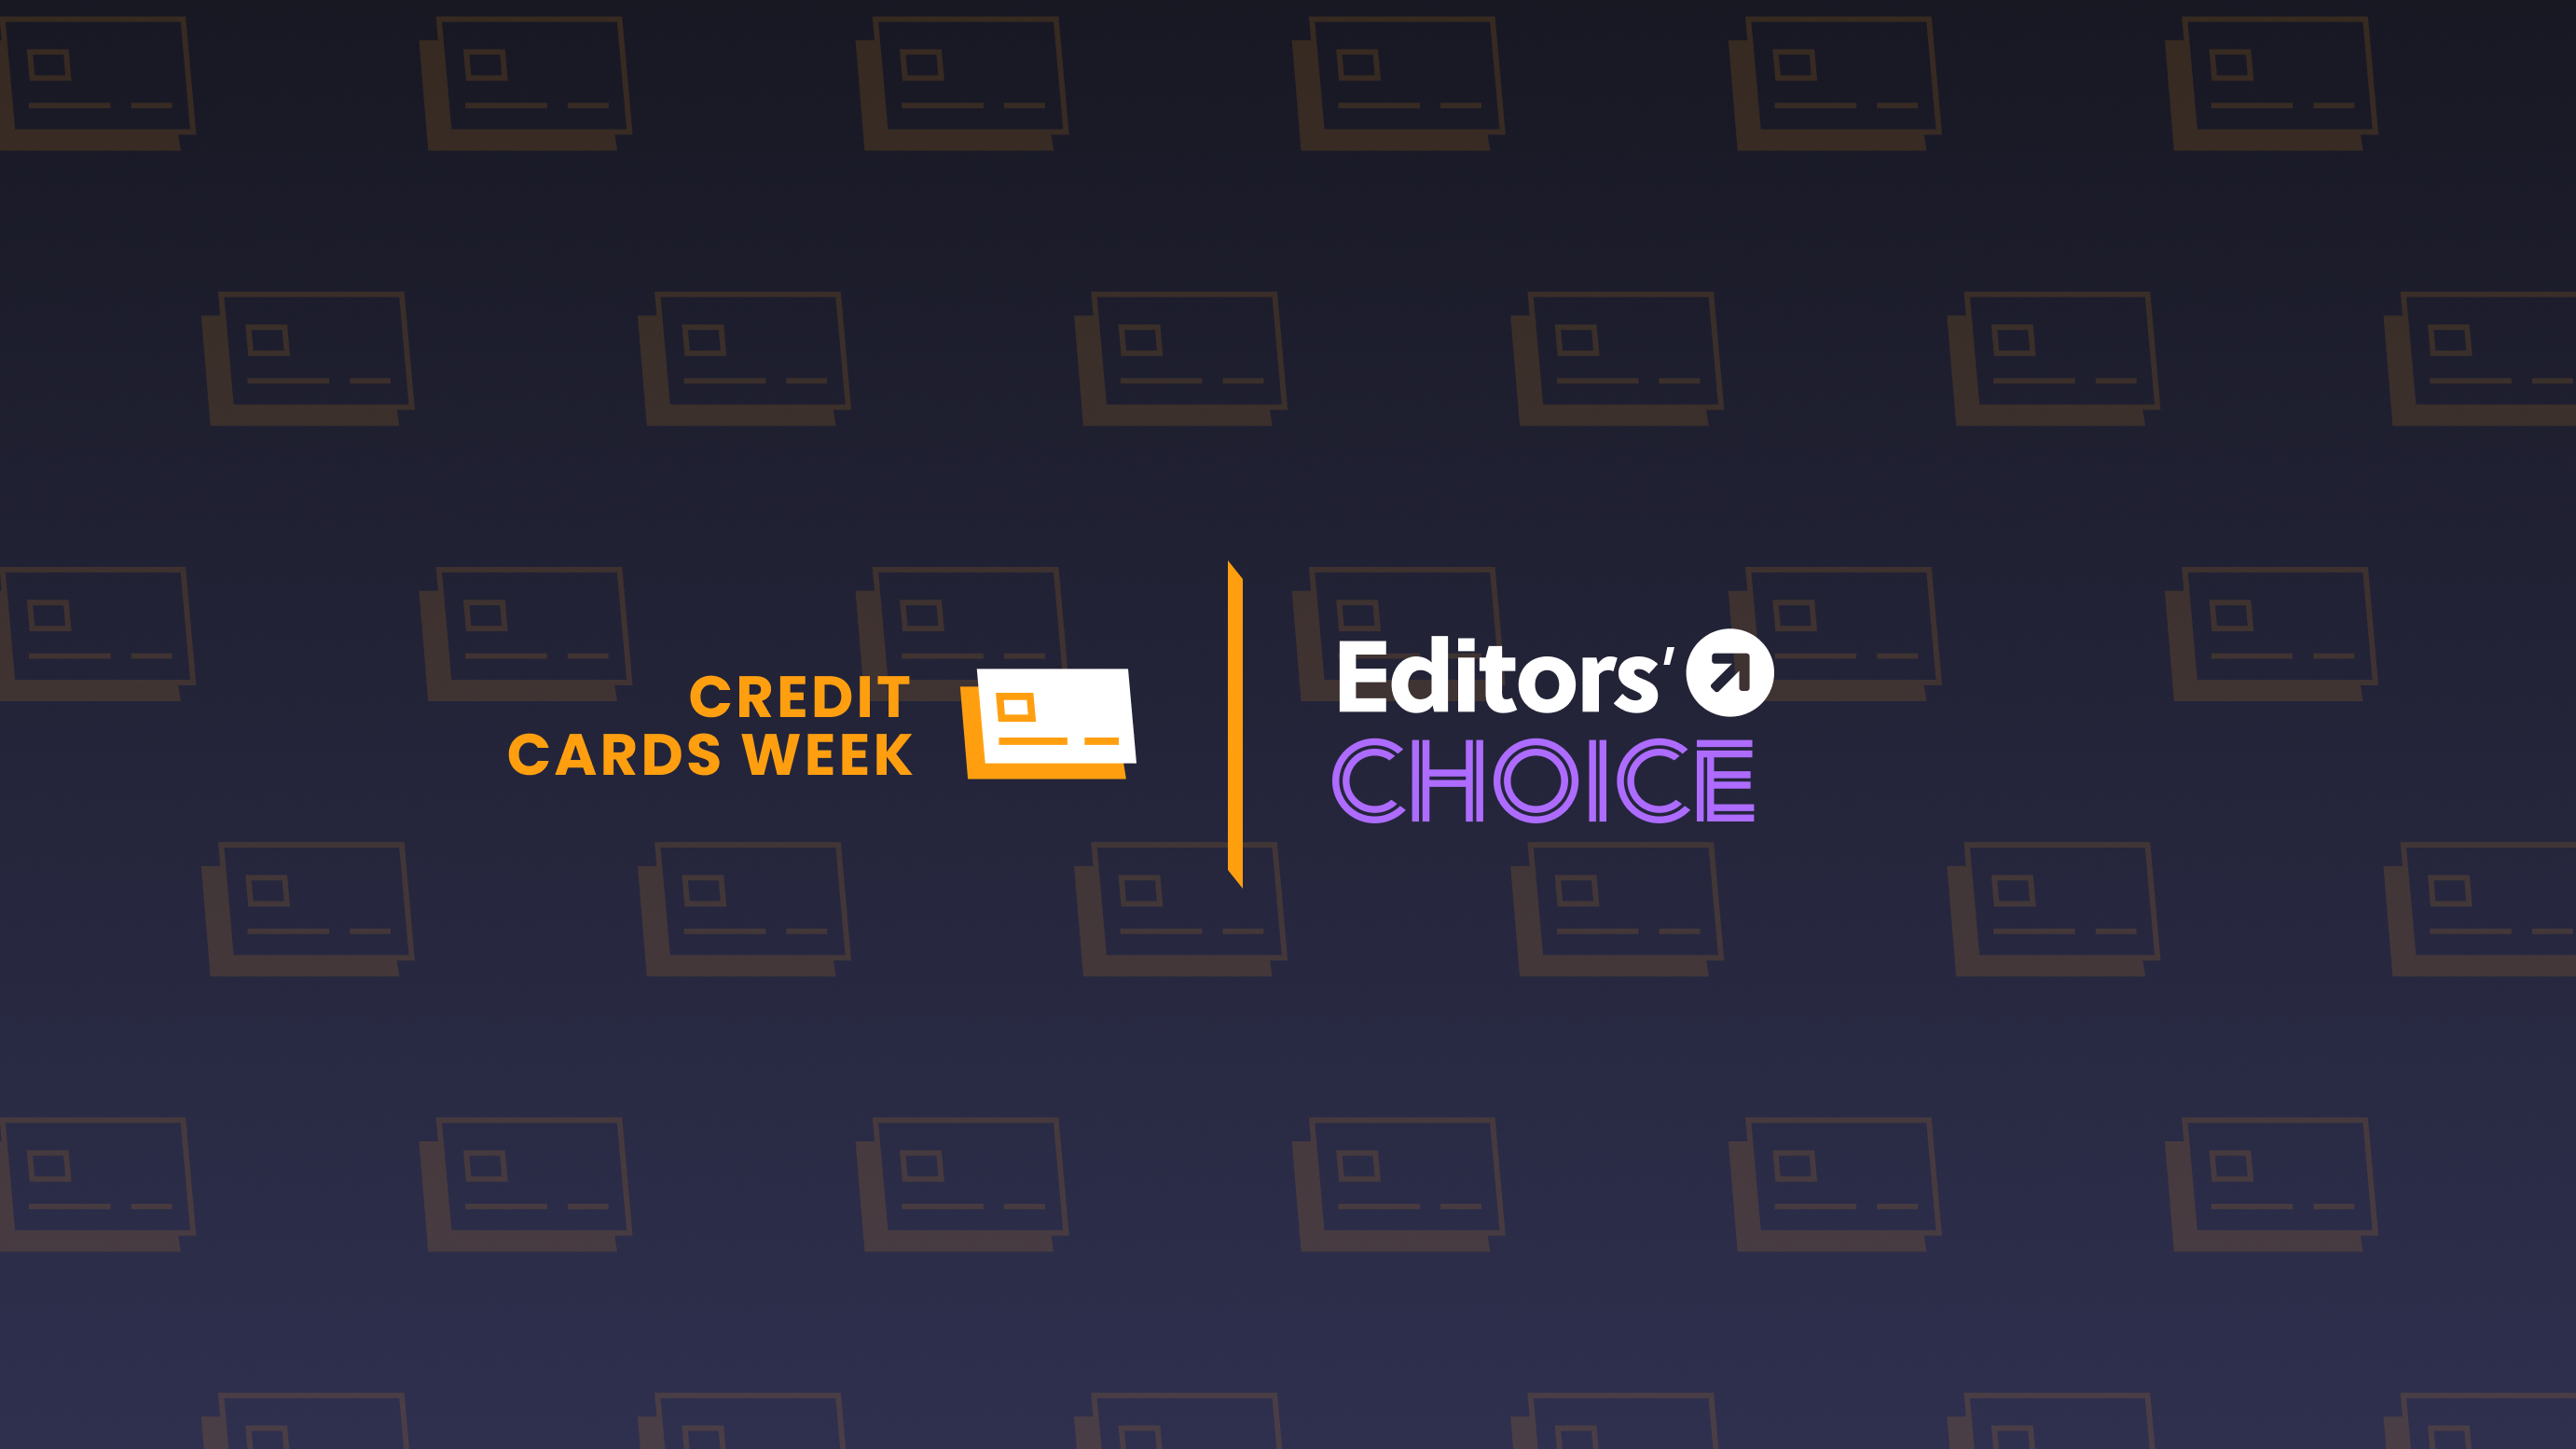 Editors' choice award featured image for Credit Cards Week at the 2021 TPG Awards